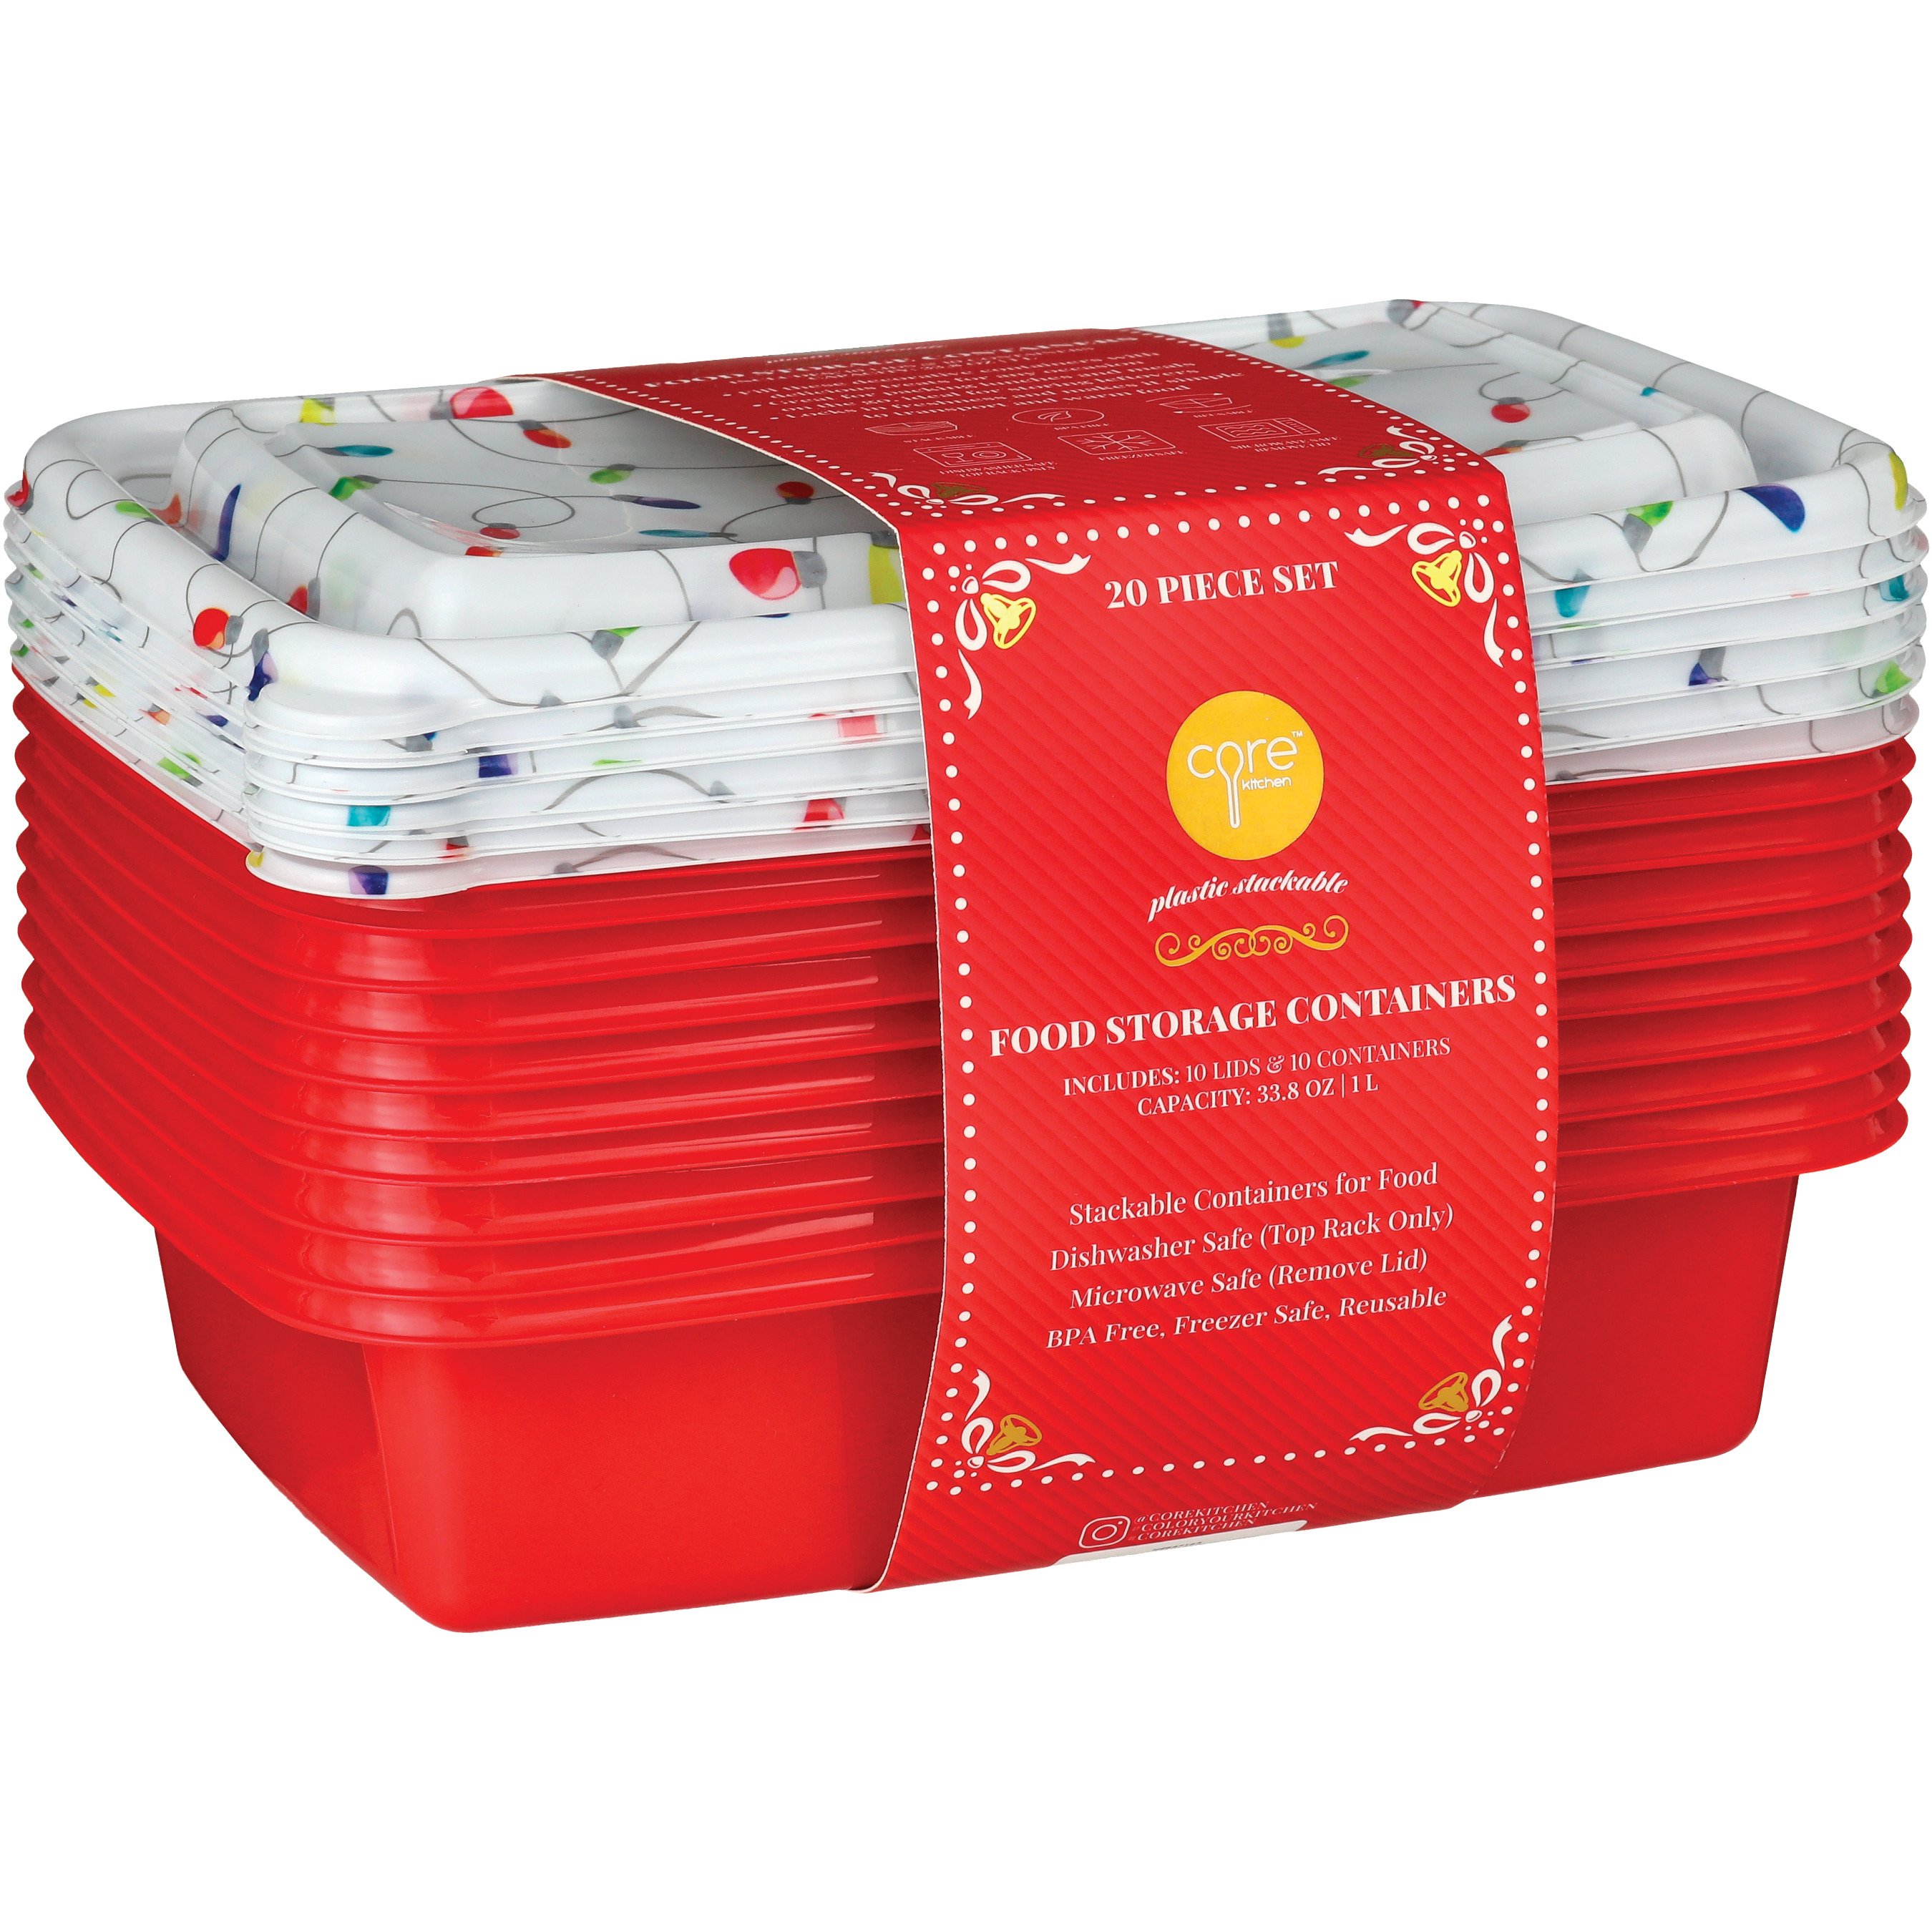 Hot sale Christmas Food Containers 2pk - Stripes ❉ Wholesale in